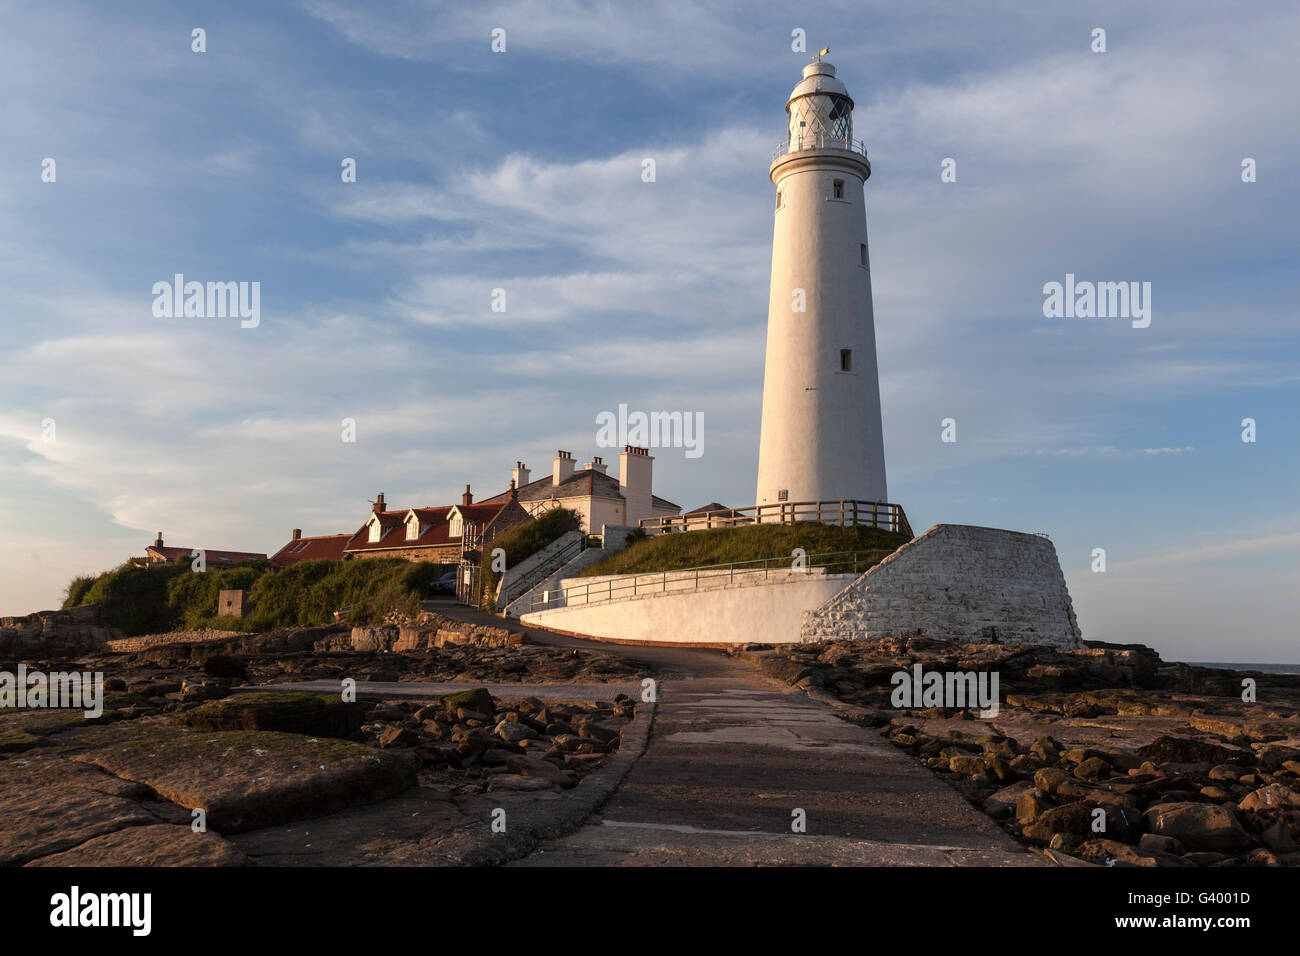 St. Mary's Lighthouse in St Mary's Island, Tyne and Wear, England, UK Stock Photo